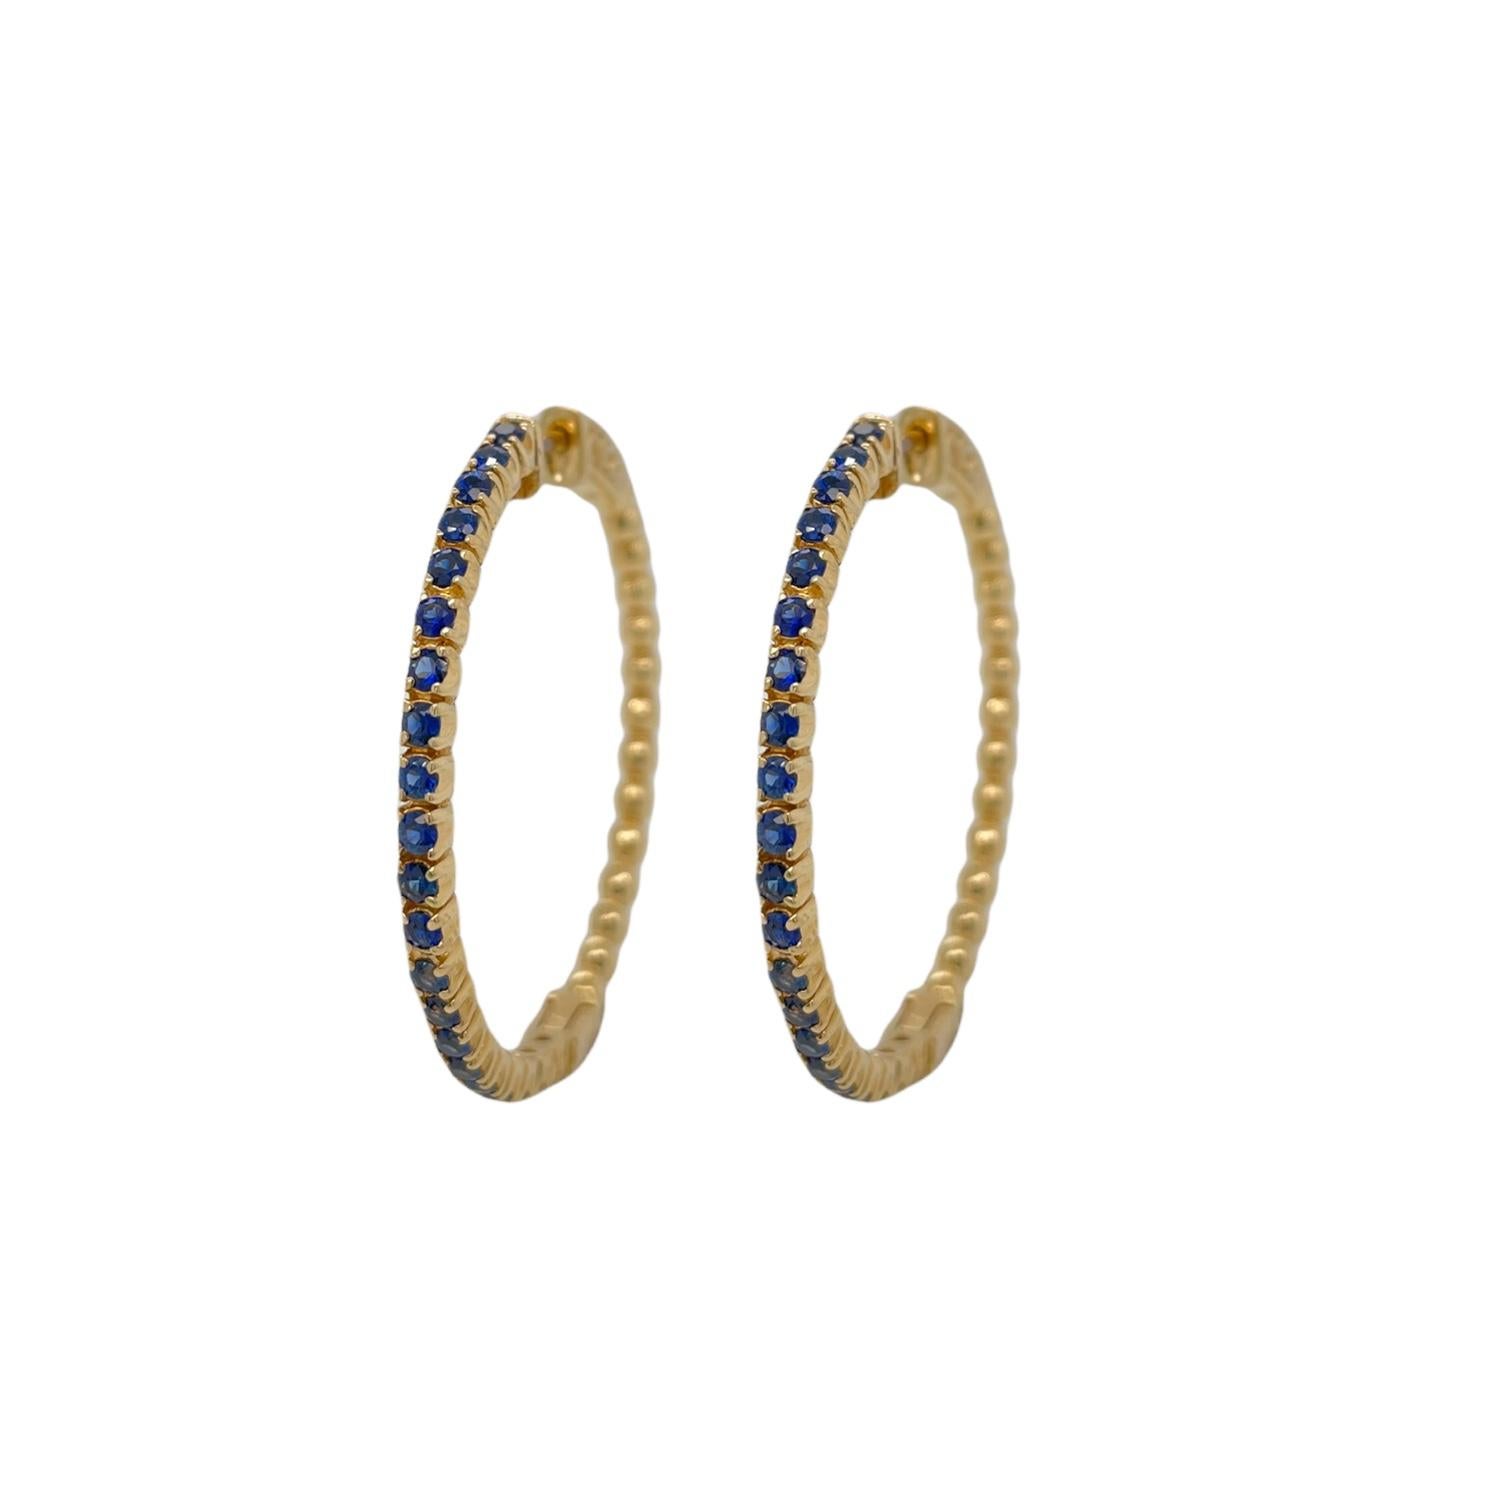 Earrings contain 42 round brilliant sapphires, 1.00tcw. Stones are mounted within handmade prong settings. Earrings measure approximately 1.5